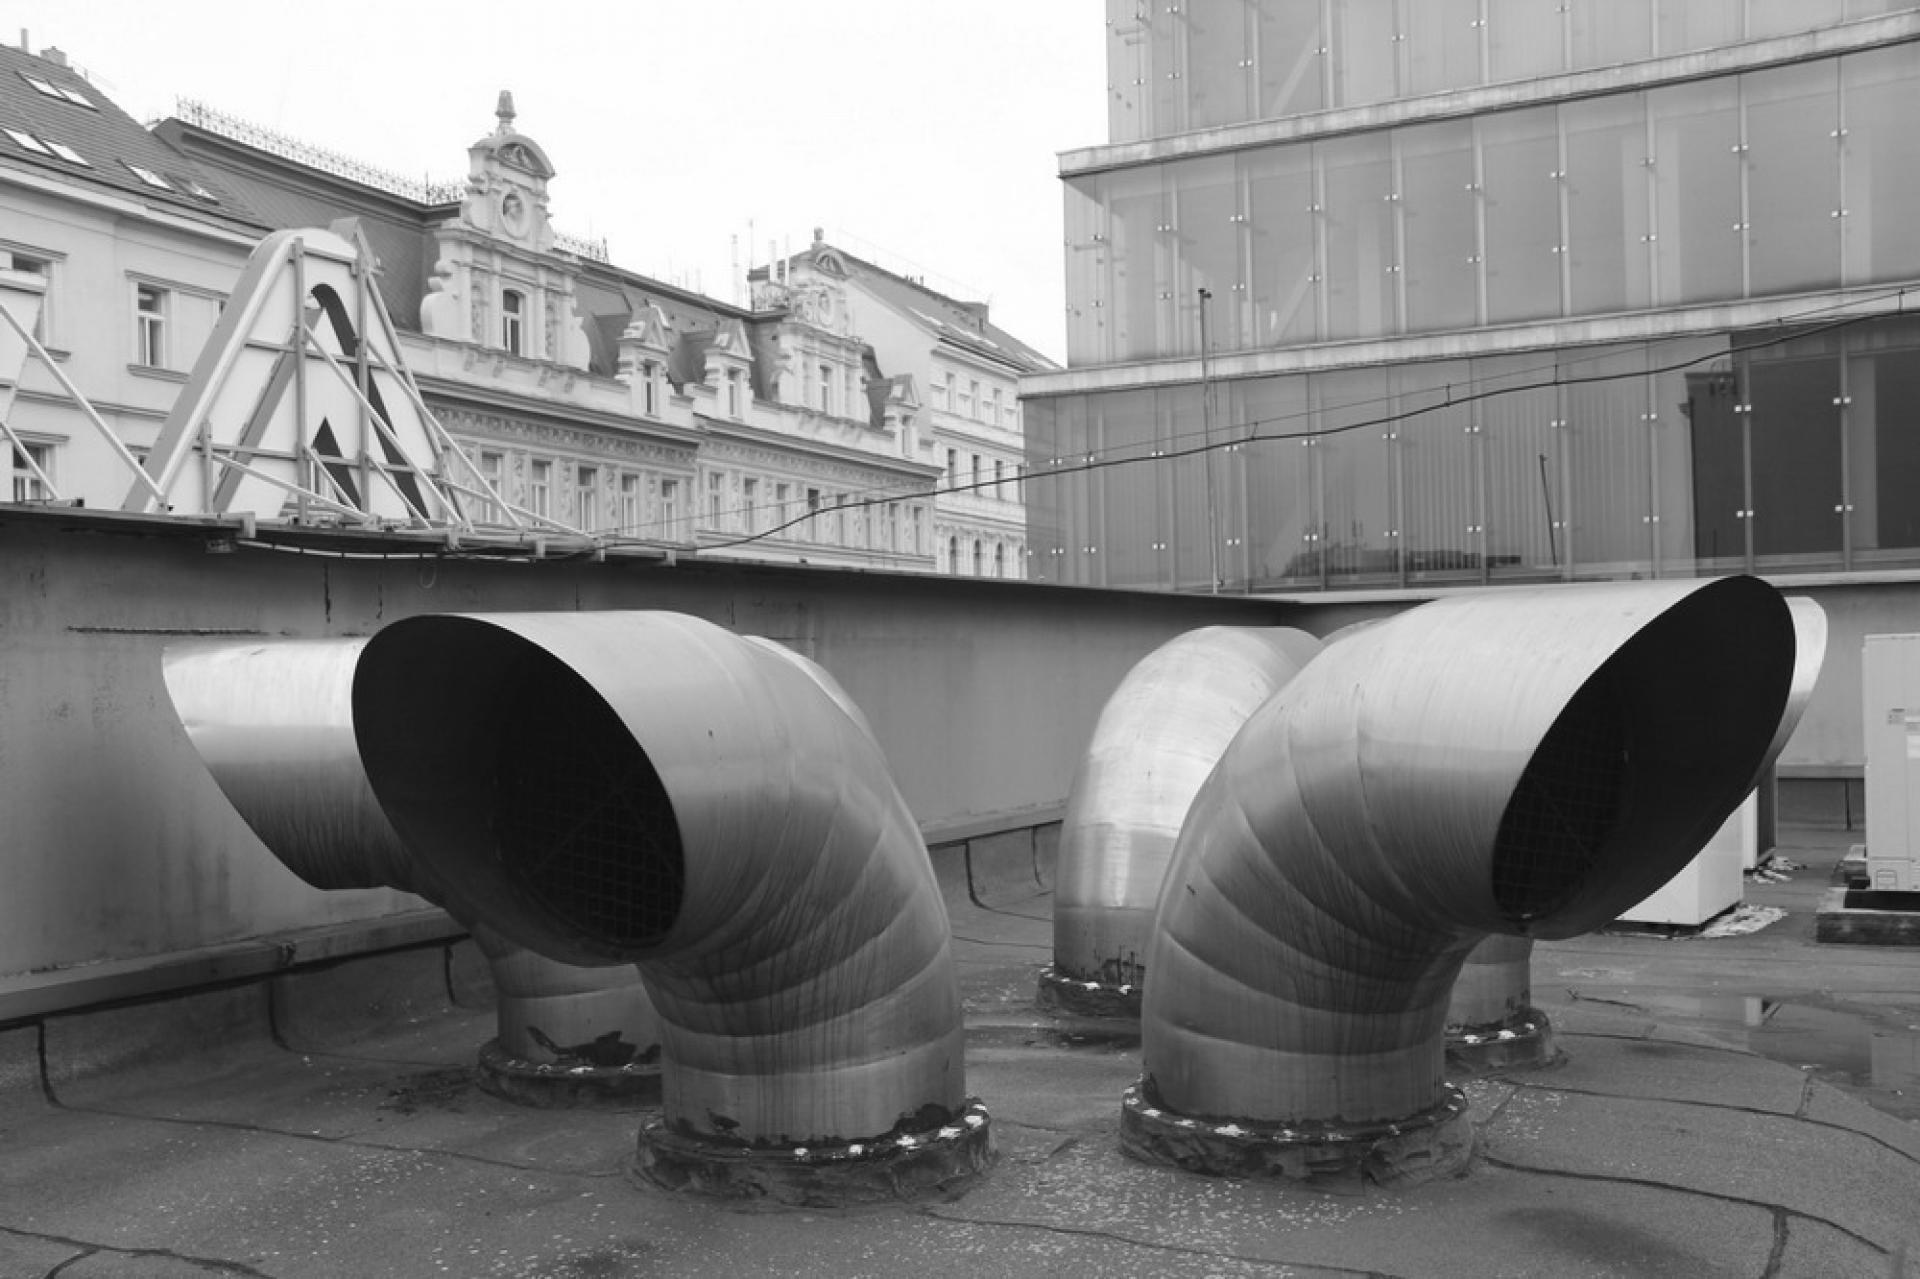 The pipes were used for the interior and exterior design. | Photo © Petr Vorlík